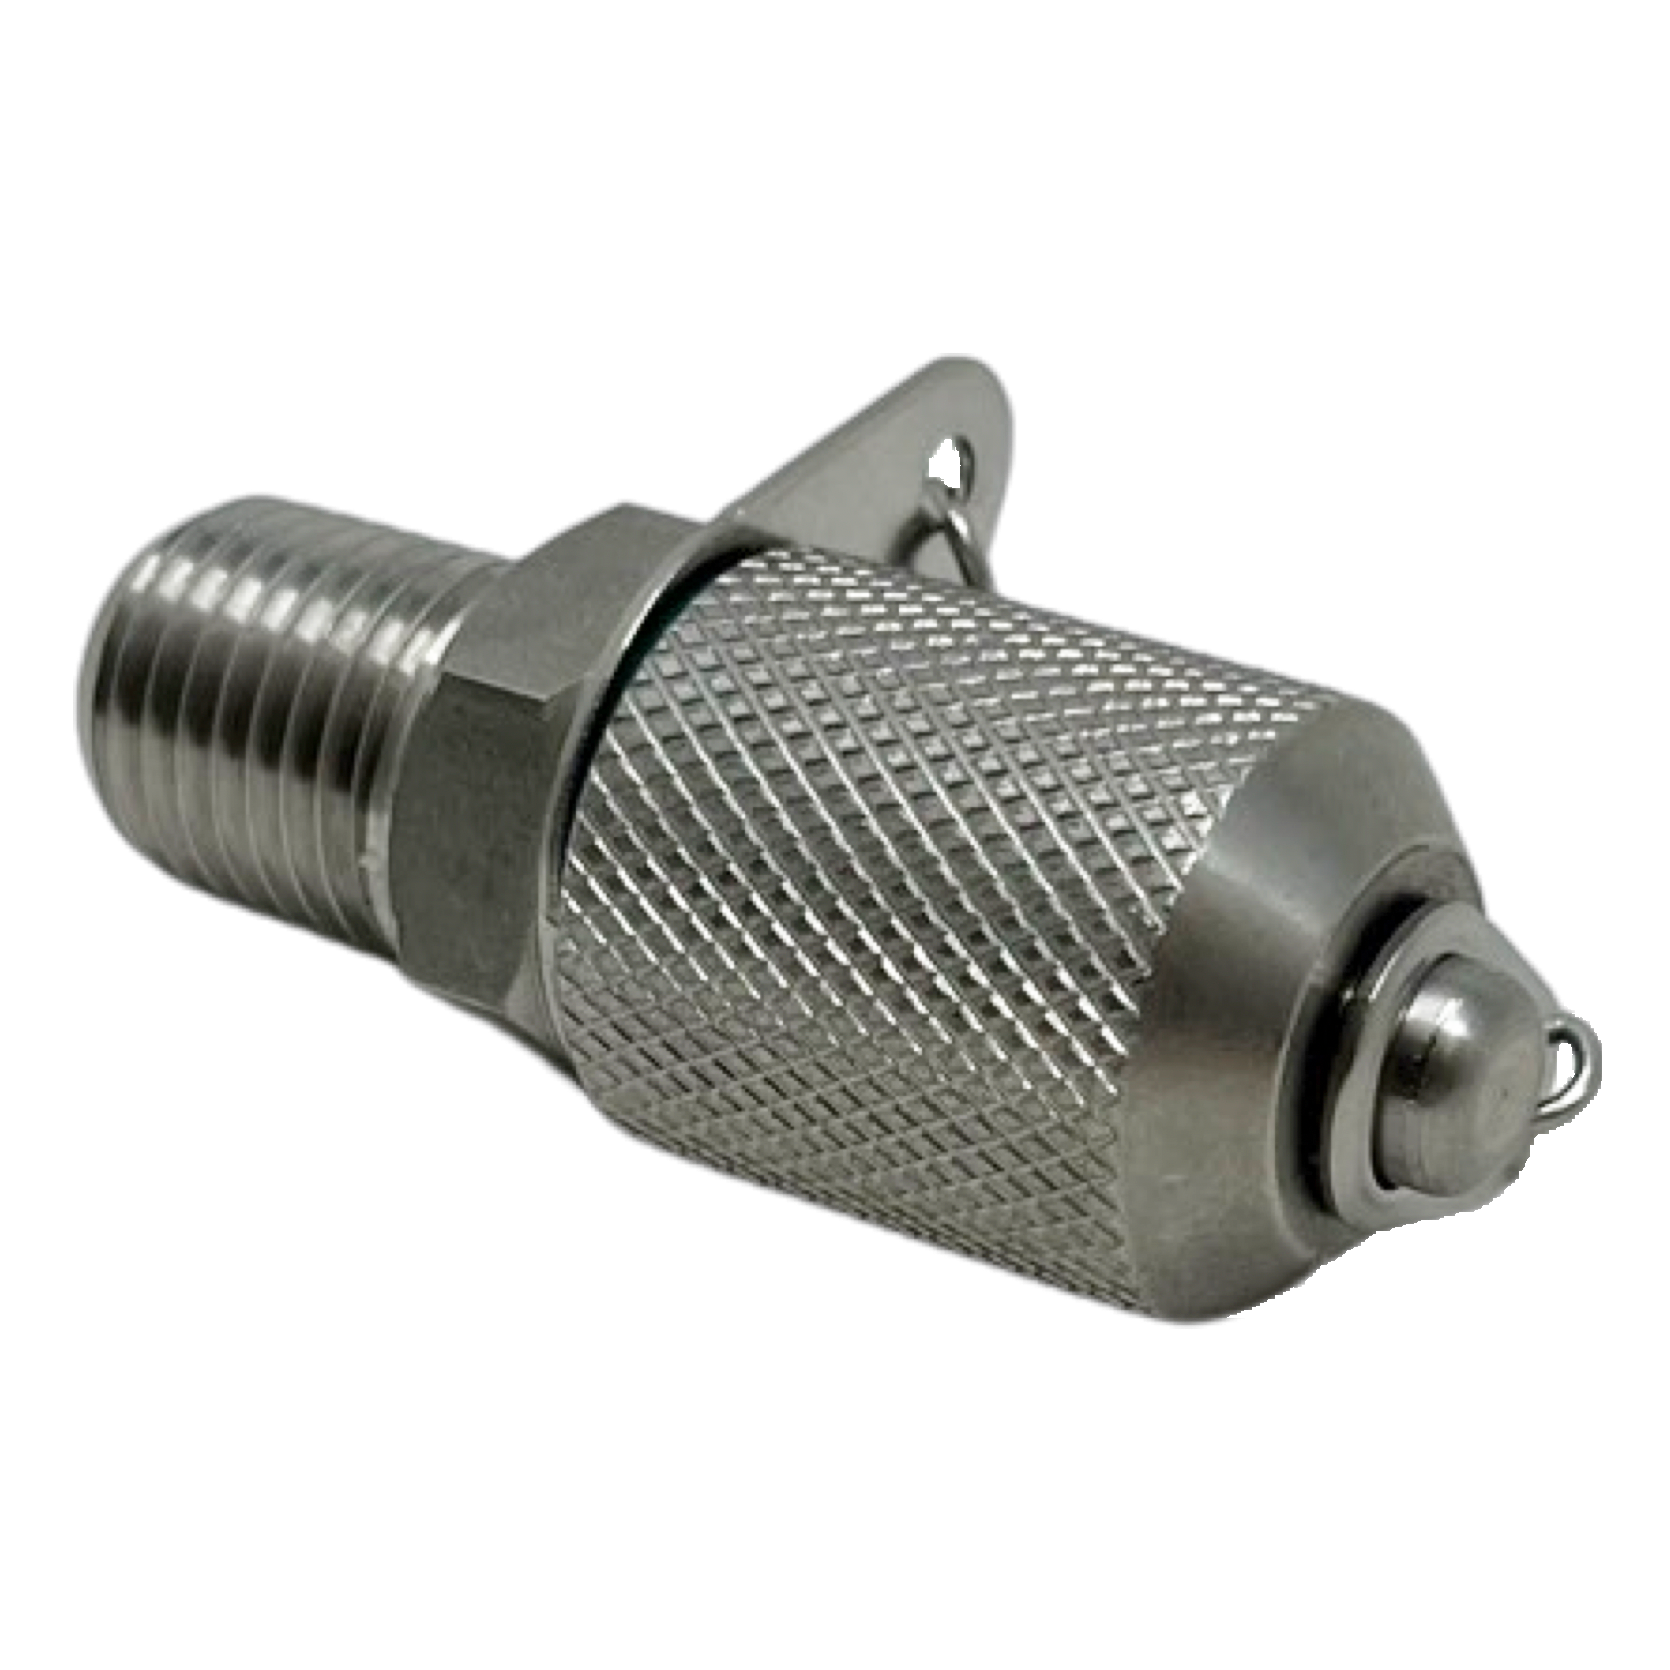 TPPM1620CBN3/8 : Anchor Test Point, 9000psi Rated, 3/8" NPT, Buna Seals, Zinc/Nickel Plated Carbon Steel